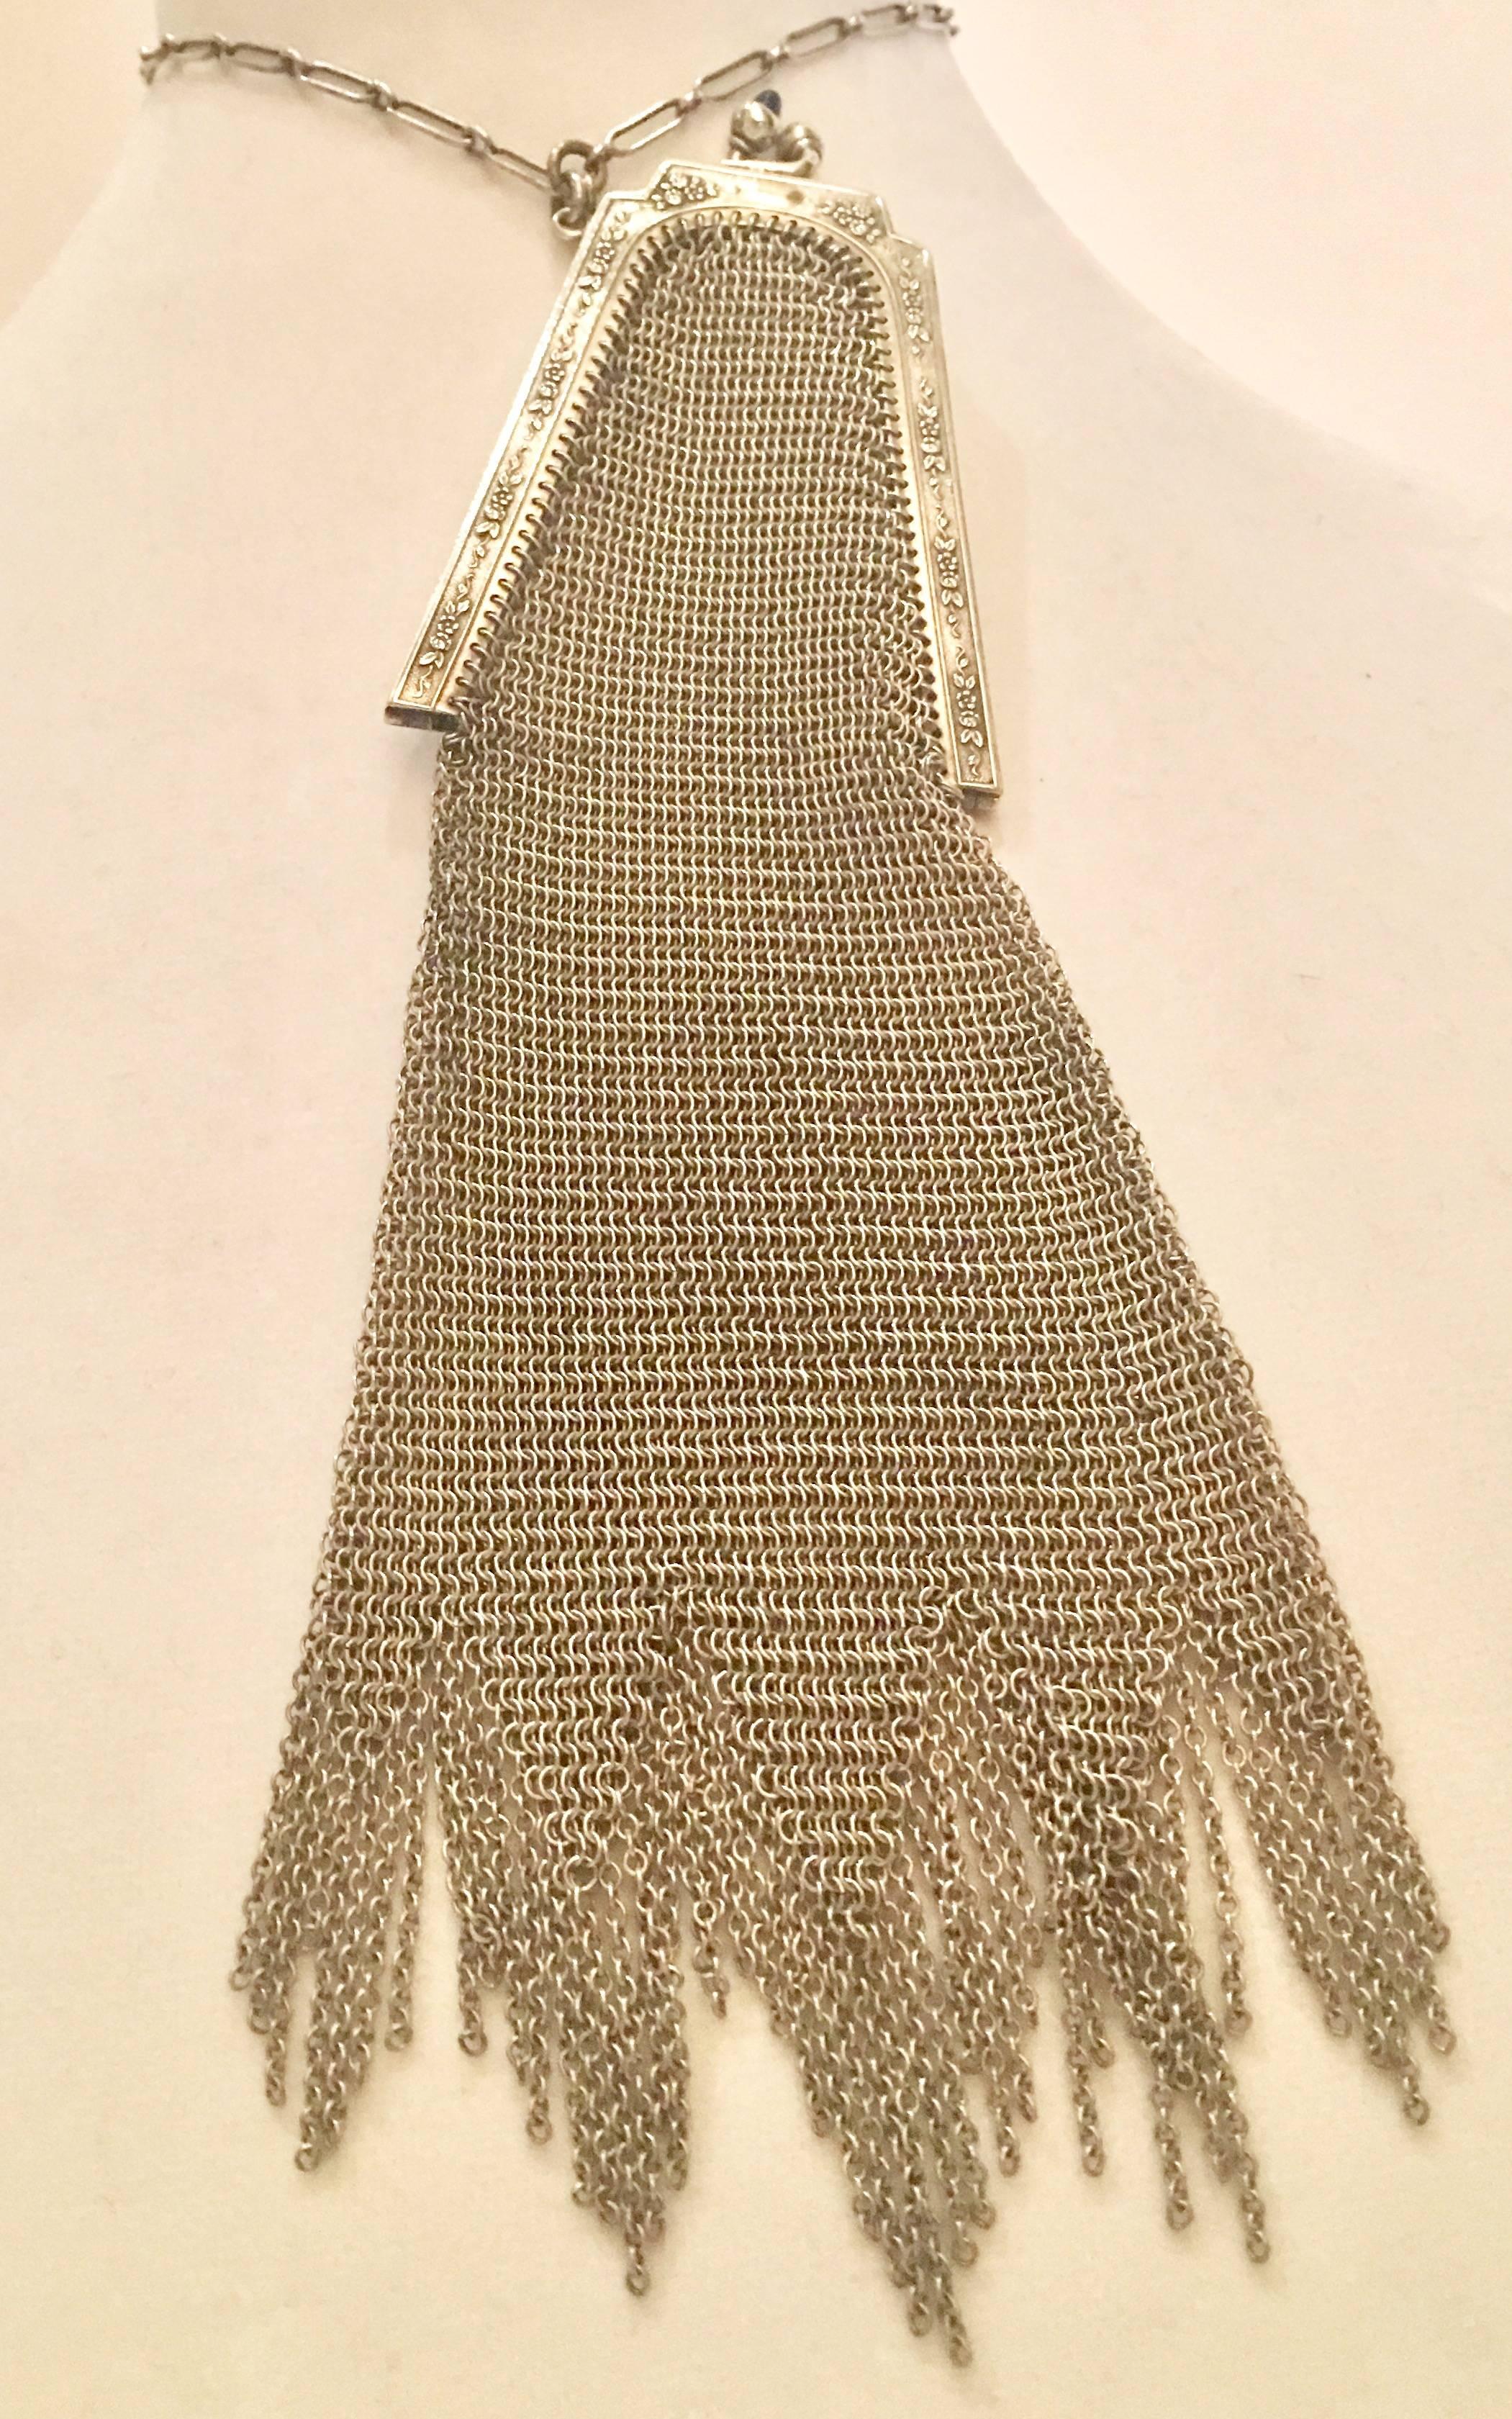 Rare Early 1900'S collectors signed Whiting & Davis Sterling Silver mesh flapper bag wristlet. Incredible delicate and always sturdy this Whiting & Davis flapper handbag features a beautiful Venetian fringe bottom, floral frame scroll work,